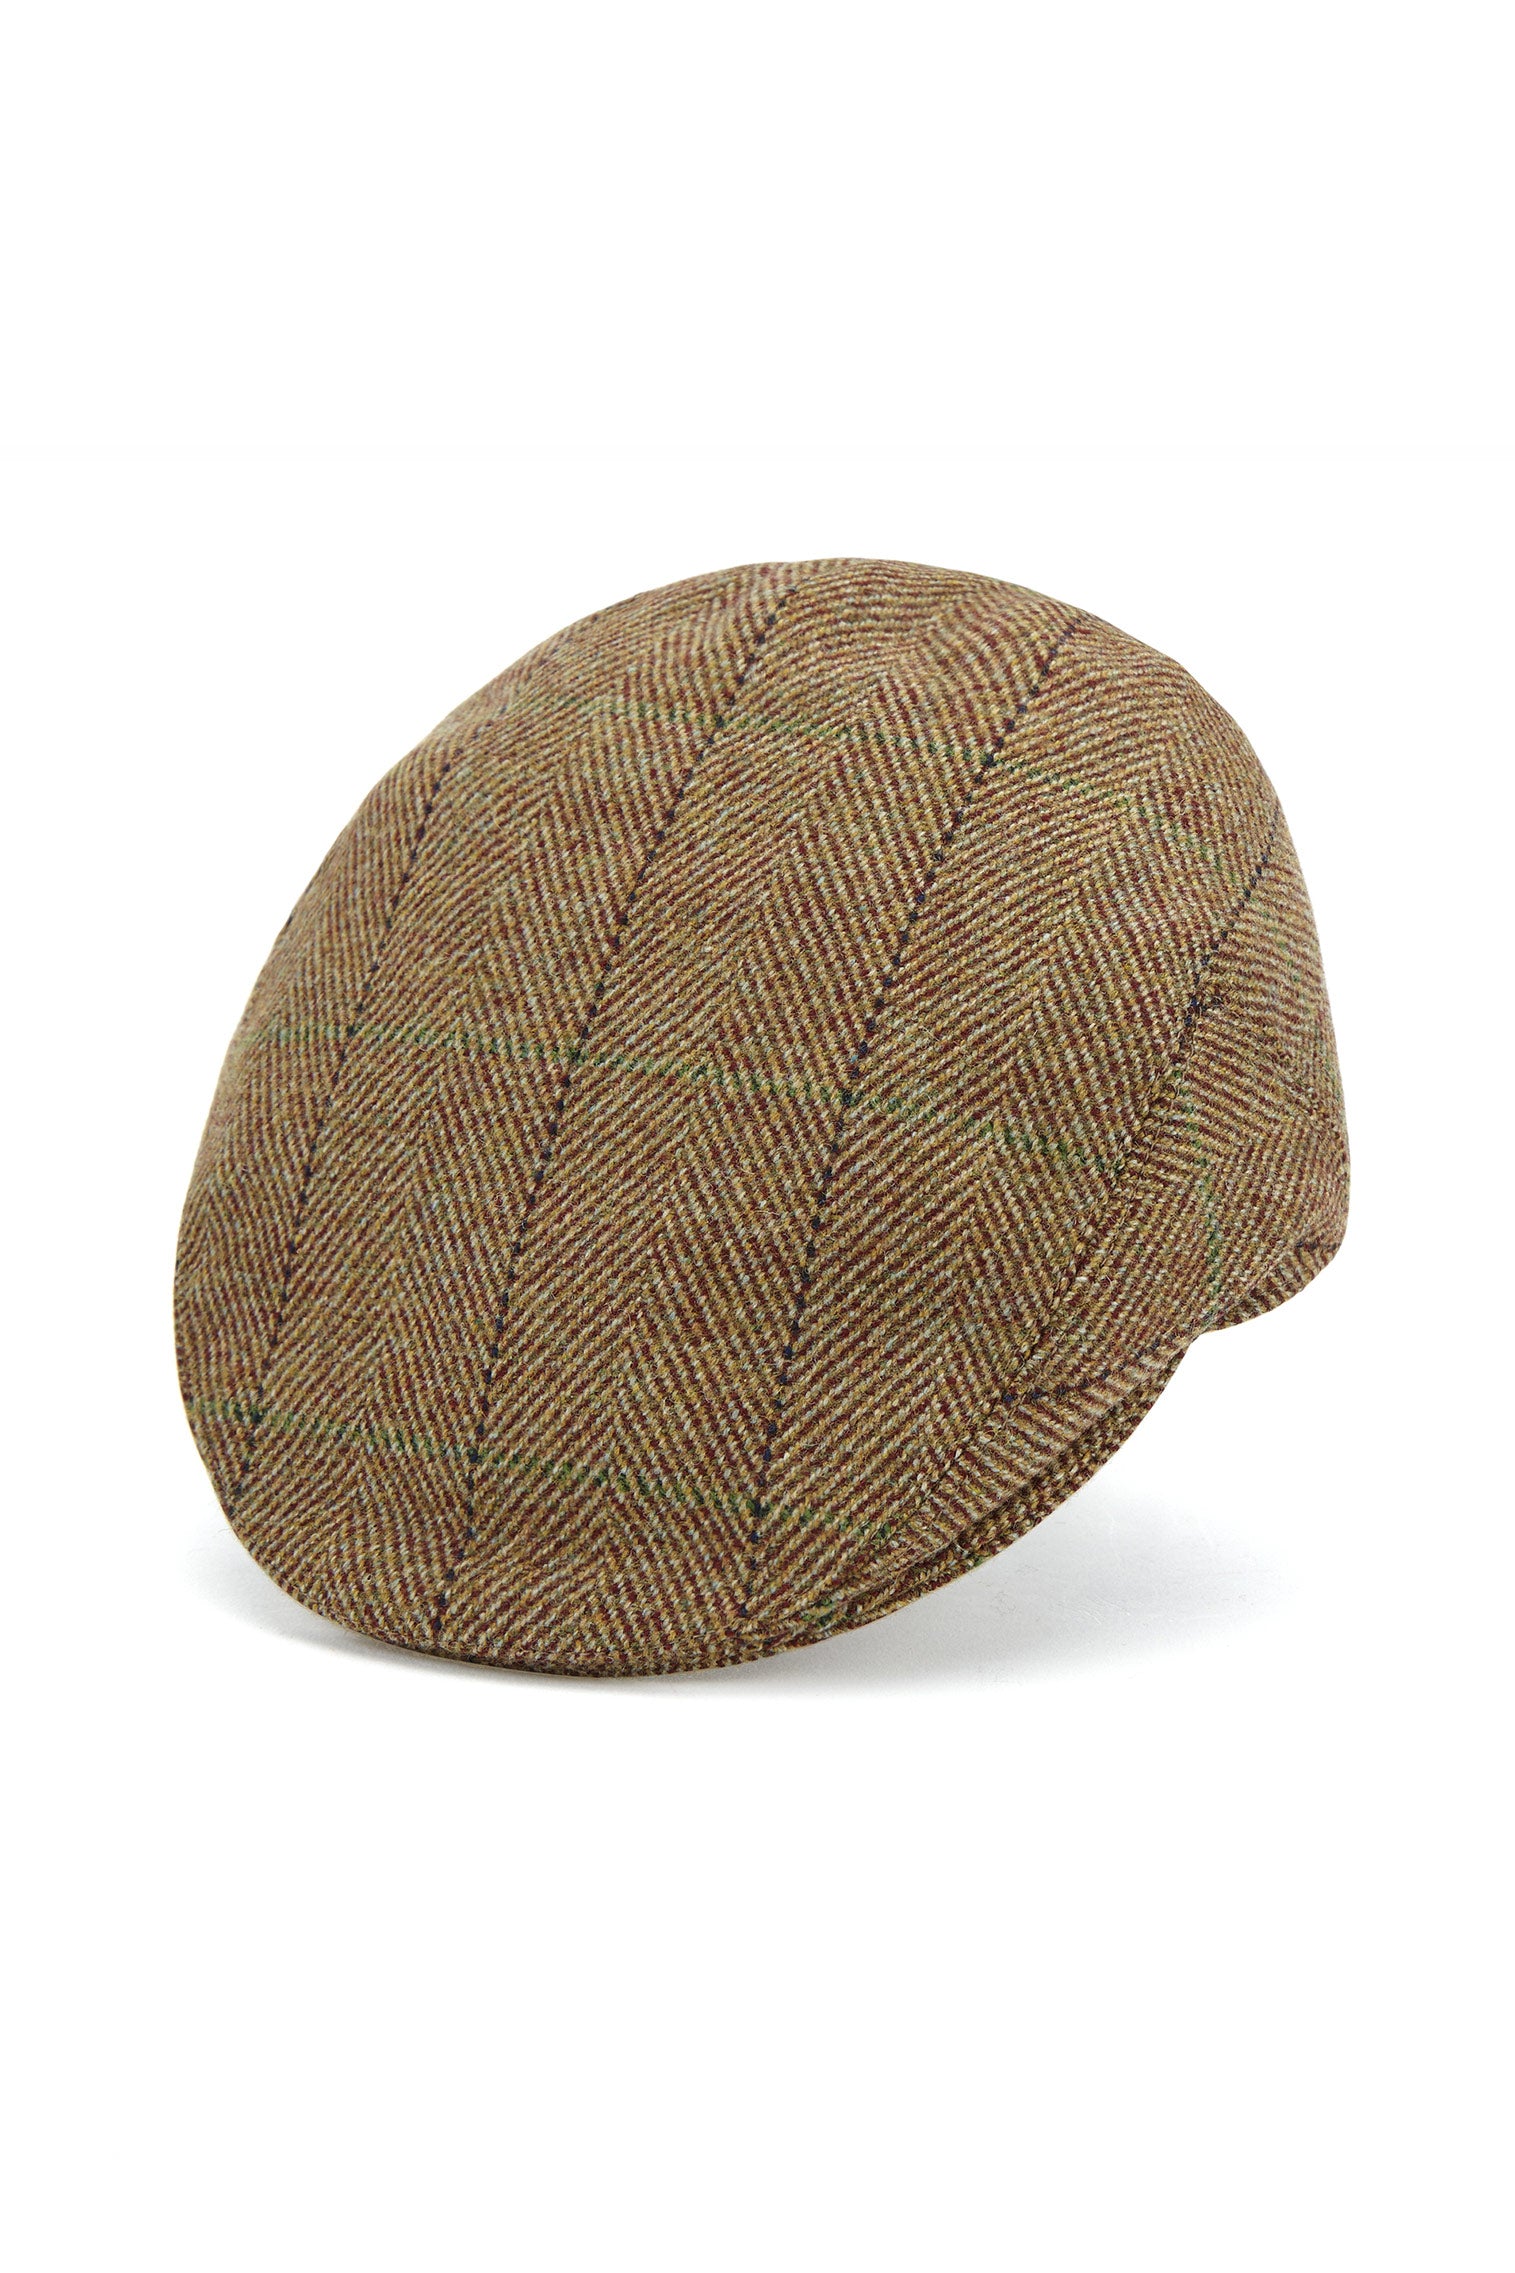 Gill Tweed Flat Cap - Hats for Oval Face Shapes - Lock & Co. Hatters London UK